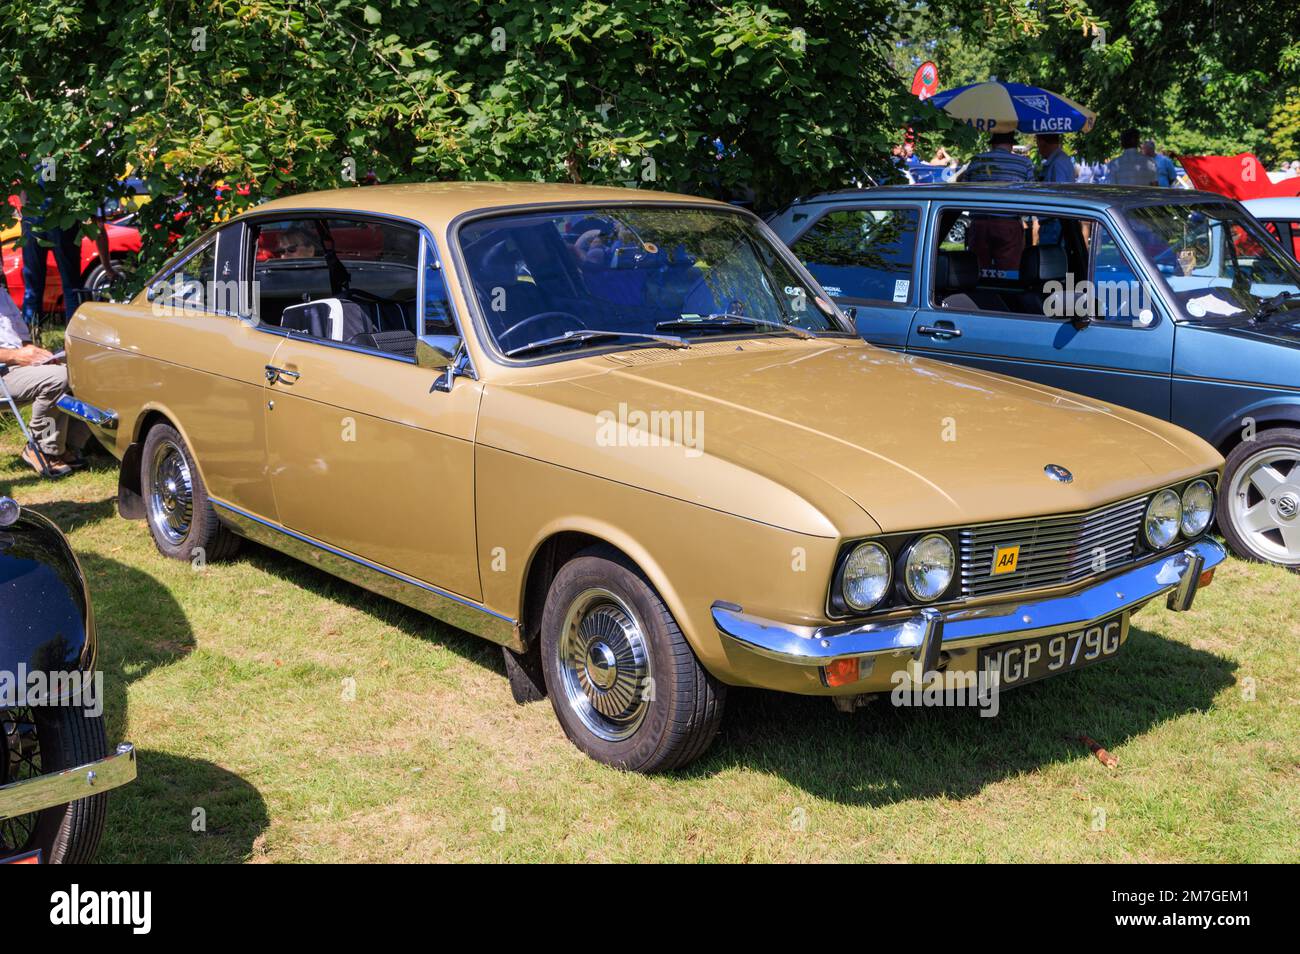 1968 Sunbeam Rapier Fastback coupé at a classic car show in the Gnoll Country Park, Neath Port Talbot, Wales, UK Stock Photo